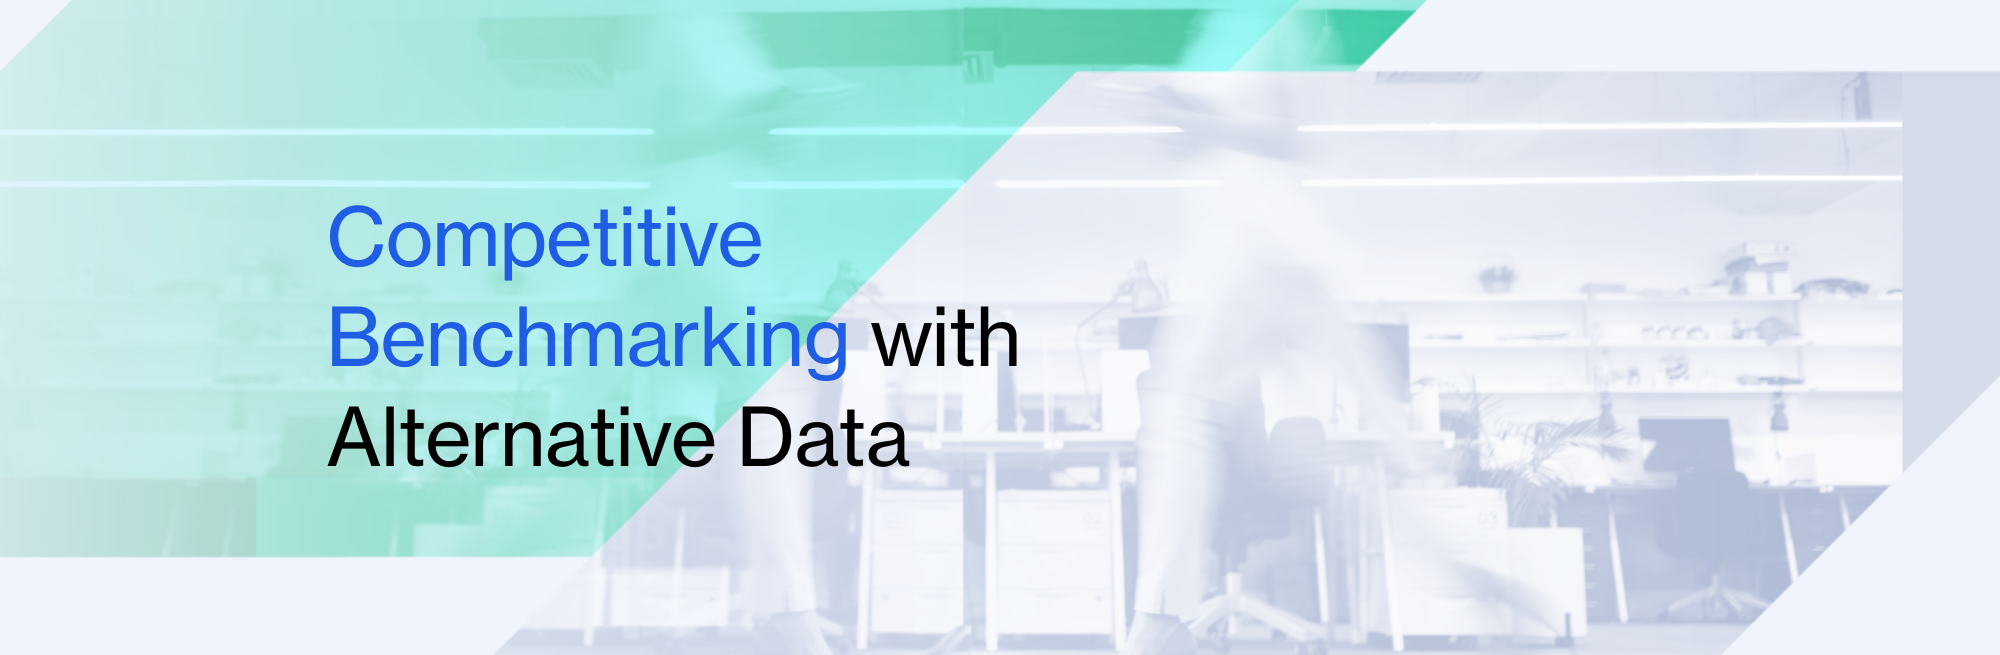 Explore Competitive Benchmarking with Alternative Data